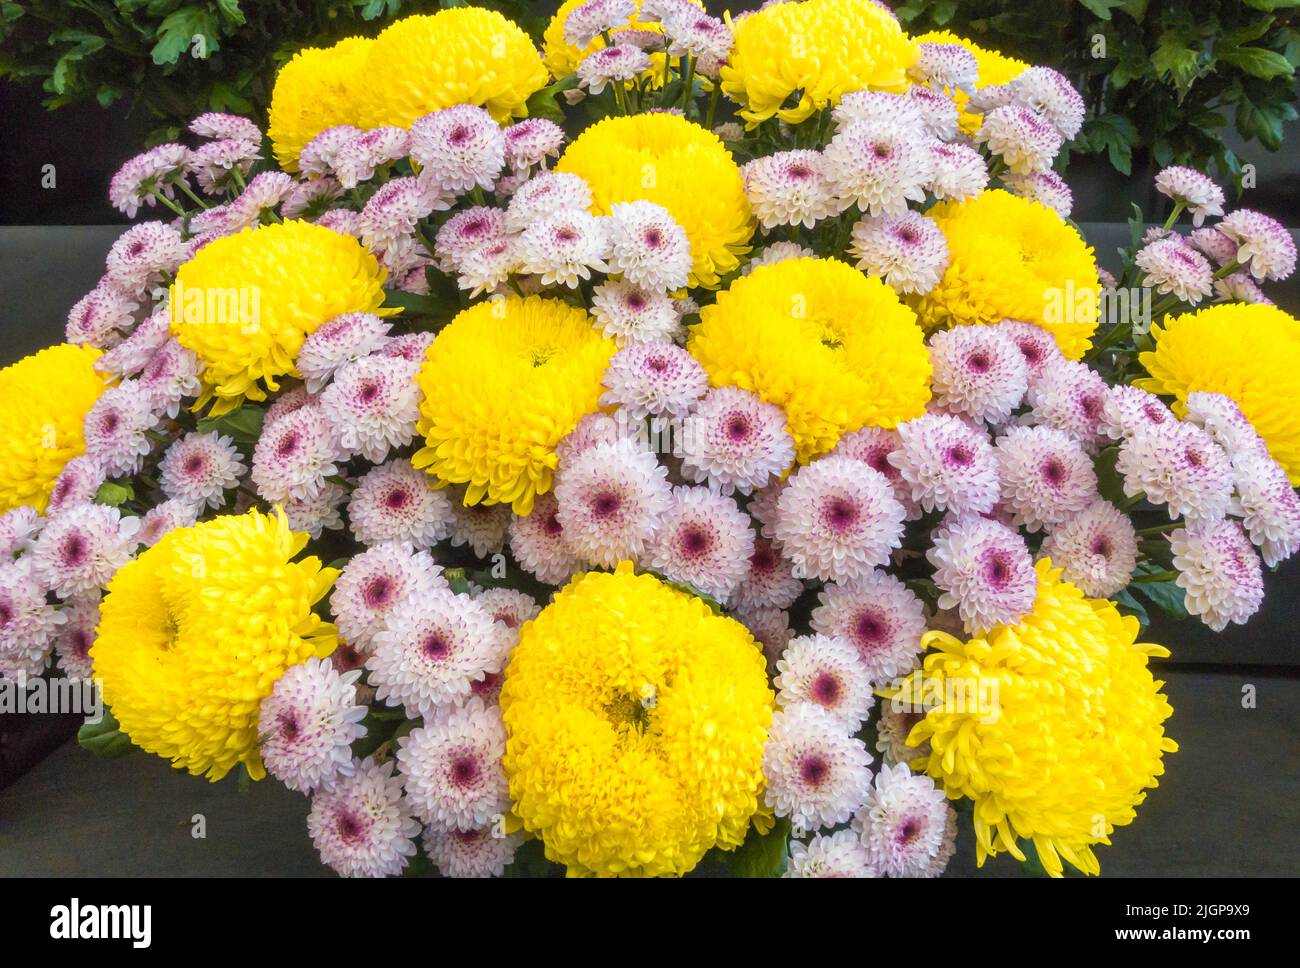 Bouquet of Chrysanthemums at the 2022 Spring Garden Show, Malvern Worcestershire England, UK. May 2022 Stock Photo